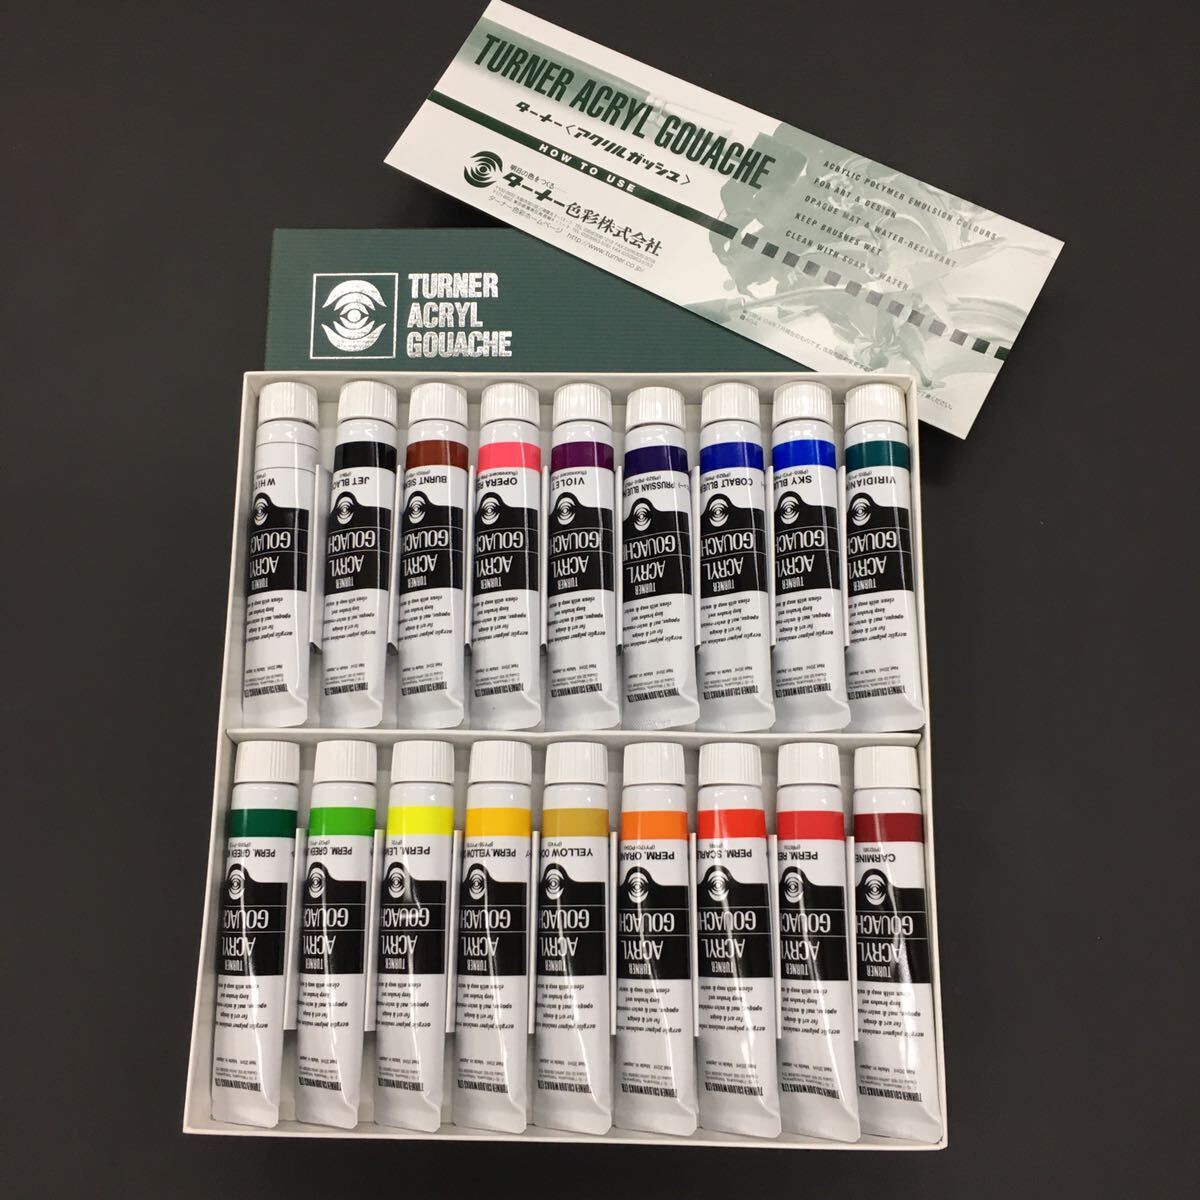 TURNER ACRYL GOUACHE turner acrylic fiber gouache 18 color set acrylic paint 20ml tube water .. speed . water-proof art supplies fine art painting materials 